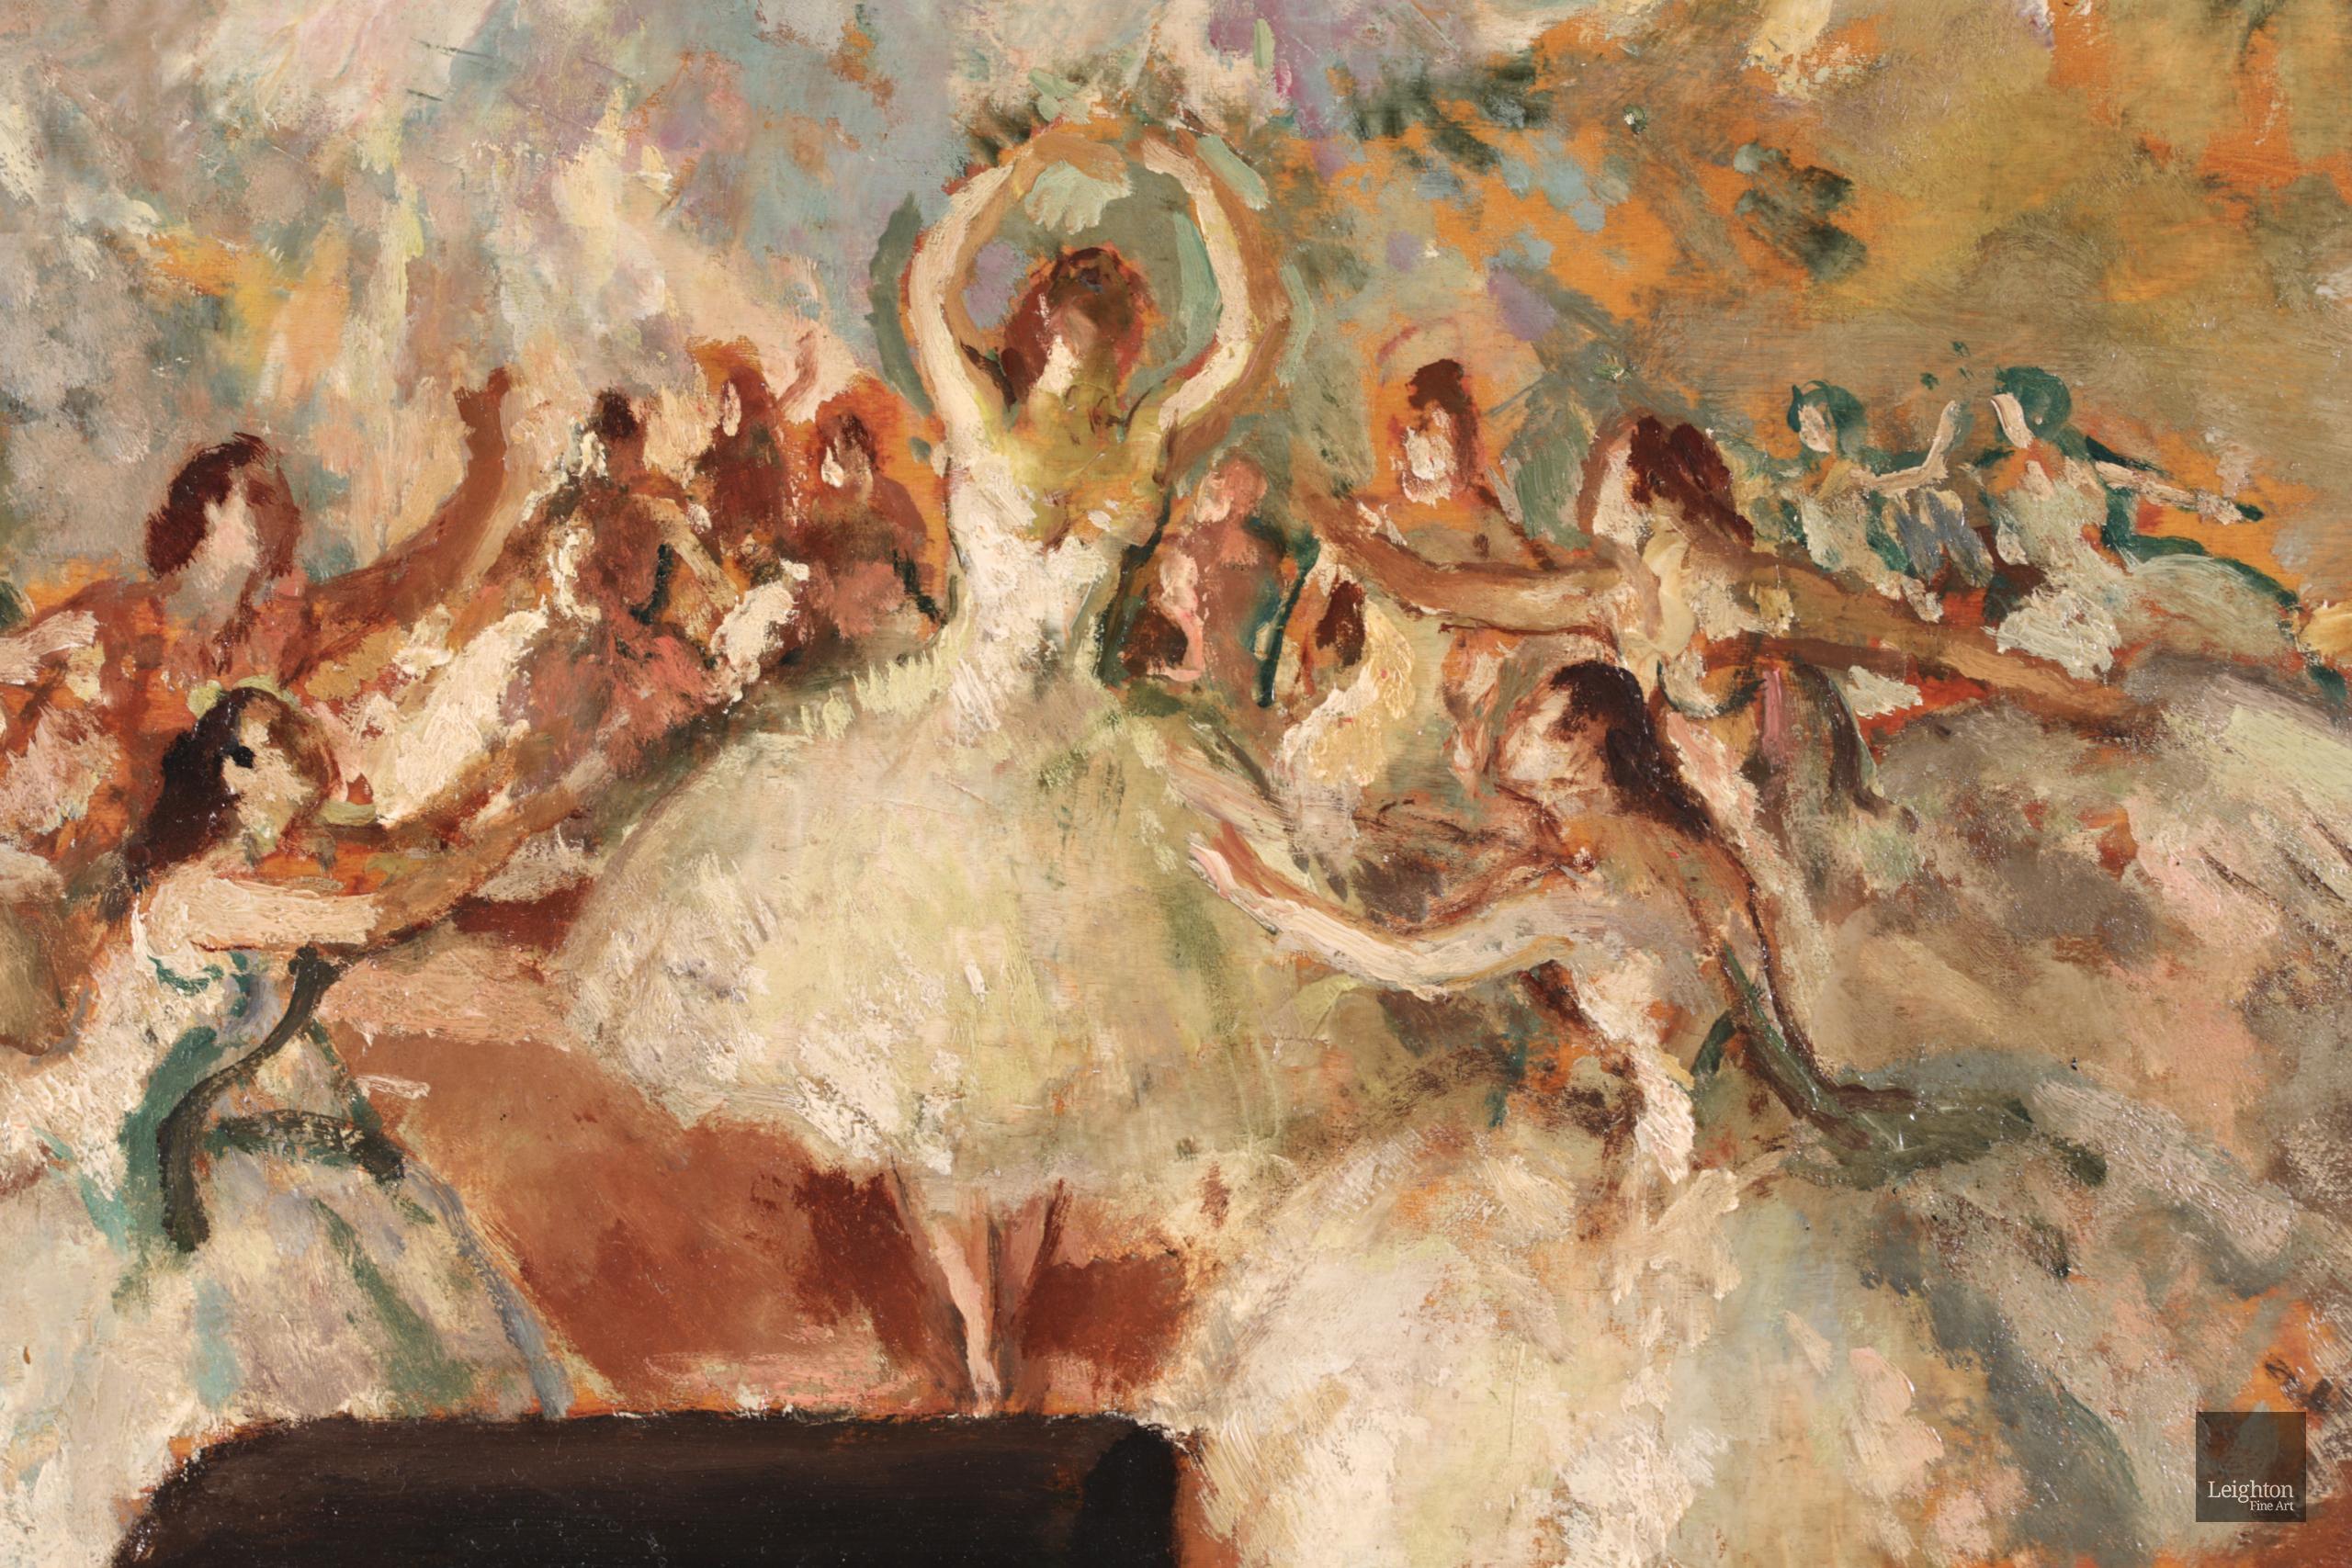 Dancers on a Stage - Post Impressionist Oil, Figures in Interior - Marcel Cosson - Post-Impressionist Painting by Jean-Louis-Marcel Cosson